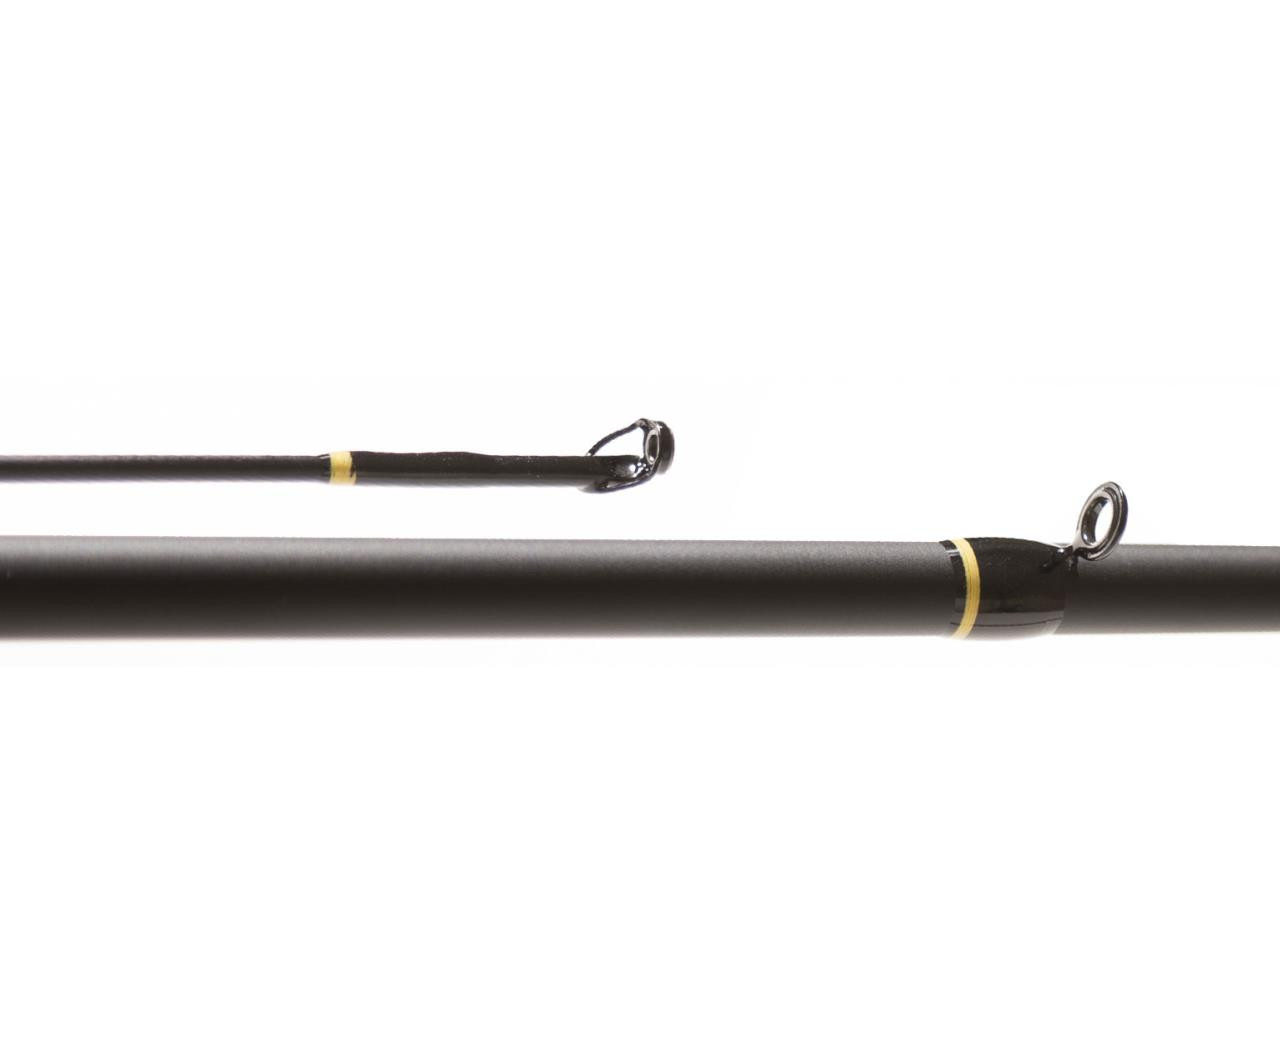 Halo Fishing Rods & Poles 1 Pieces for sale